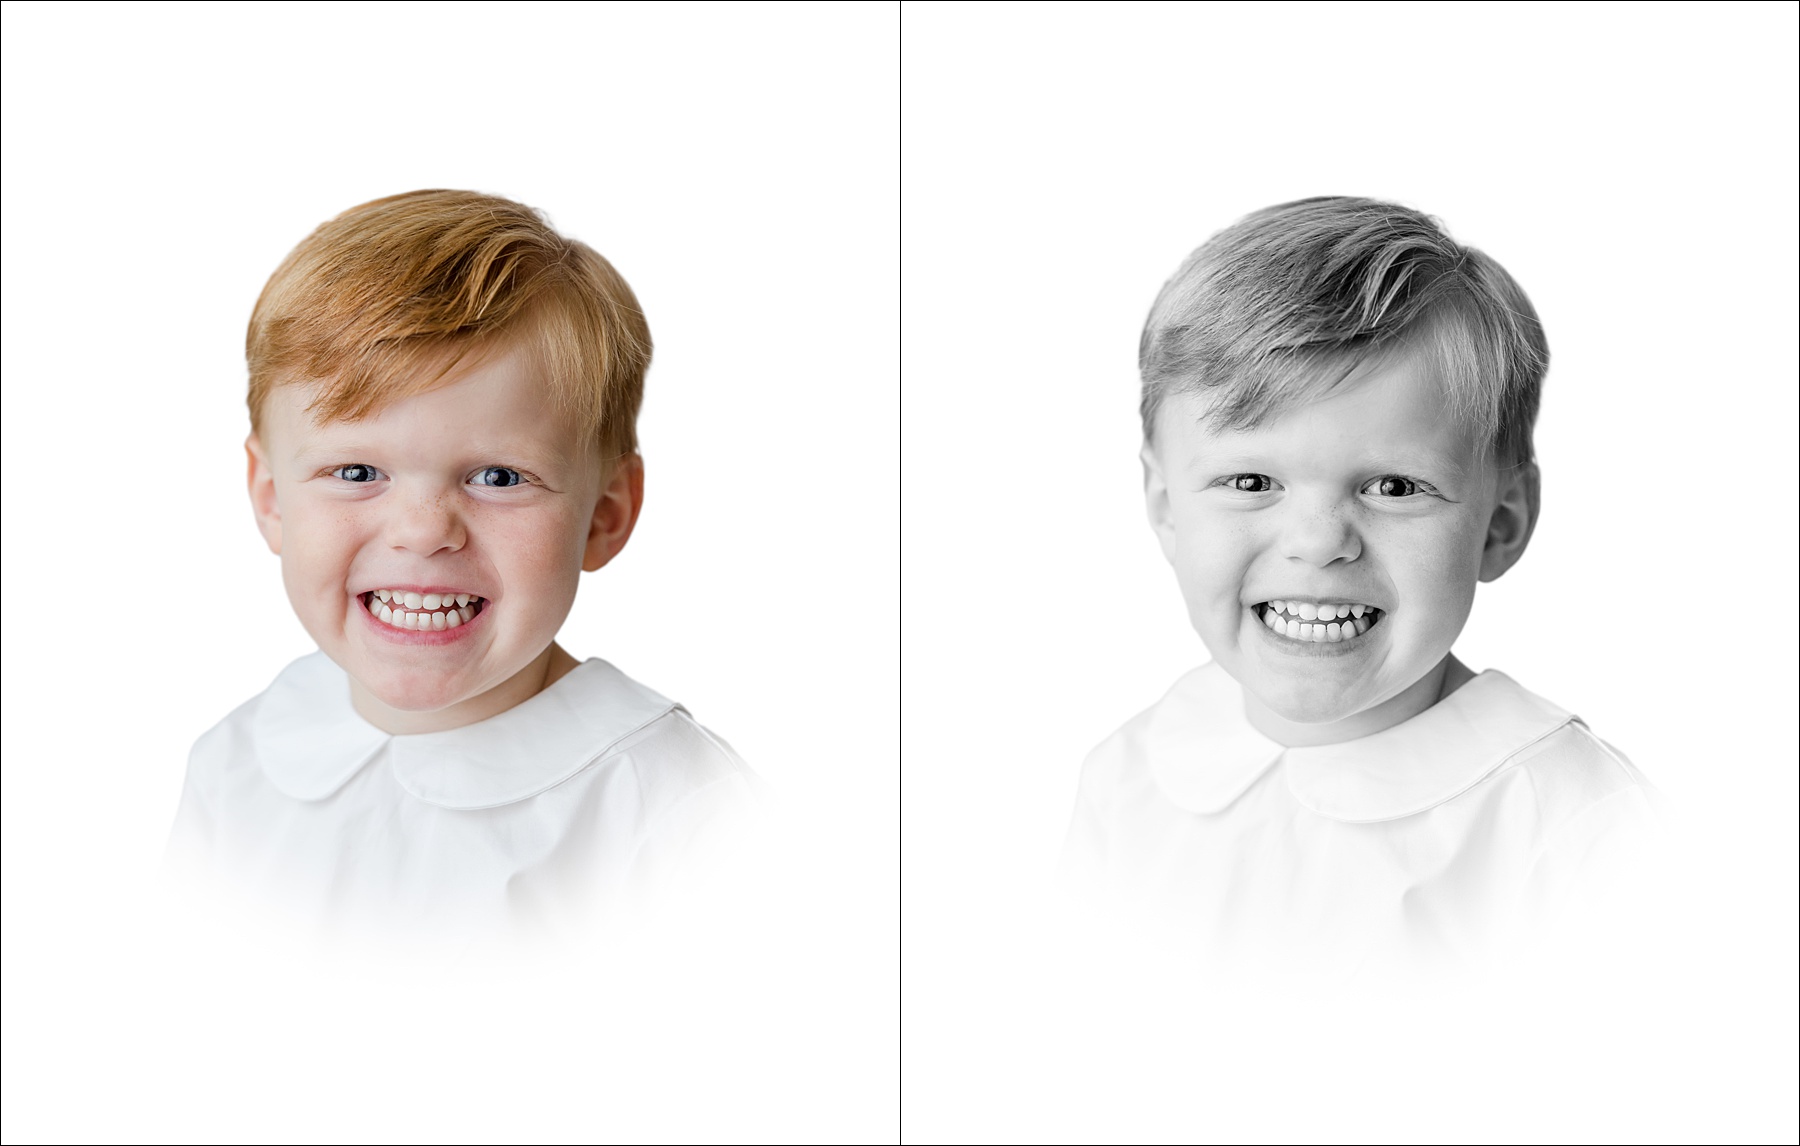 South Carolina heirloom portraits with a white vignette of a red headed young boy in color and black and white.